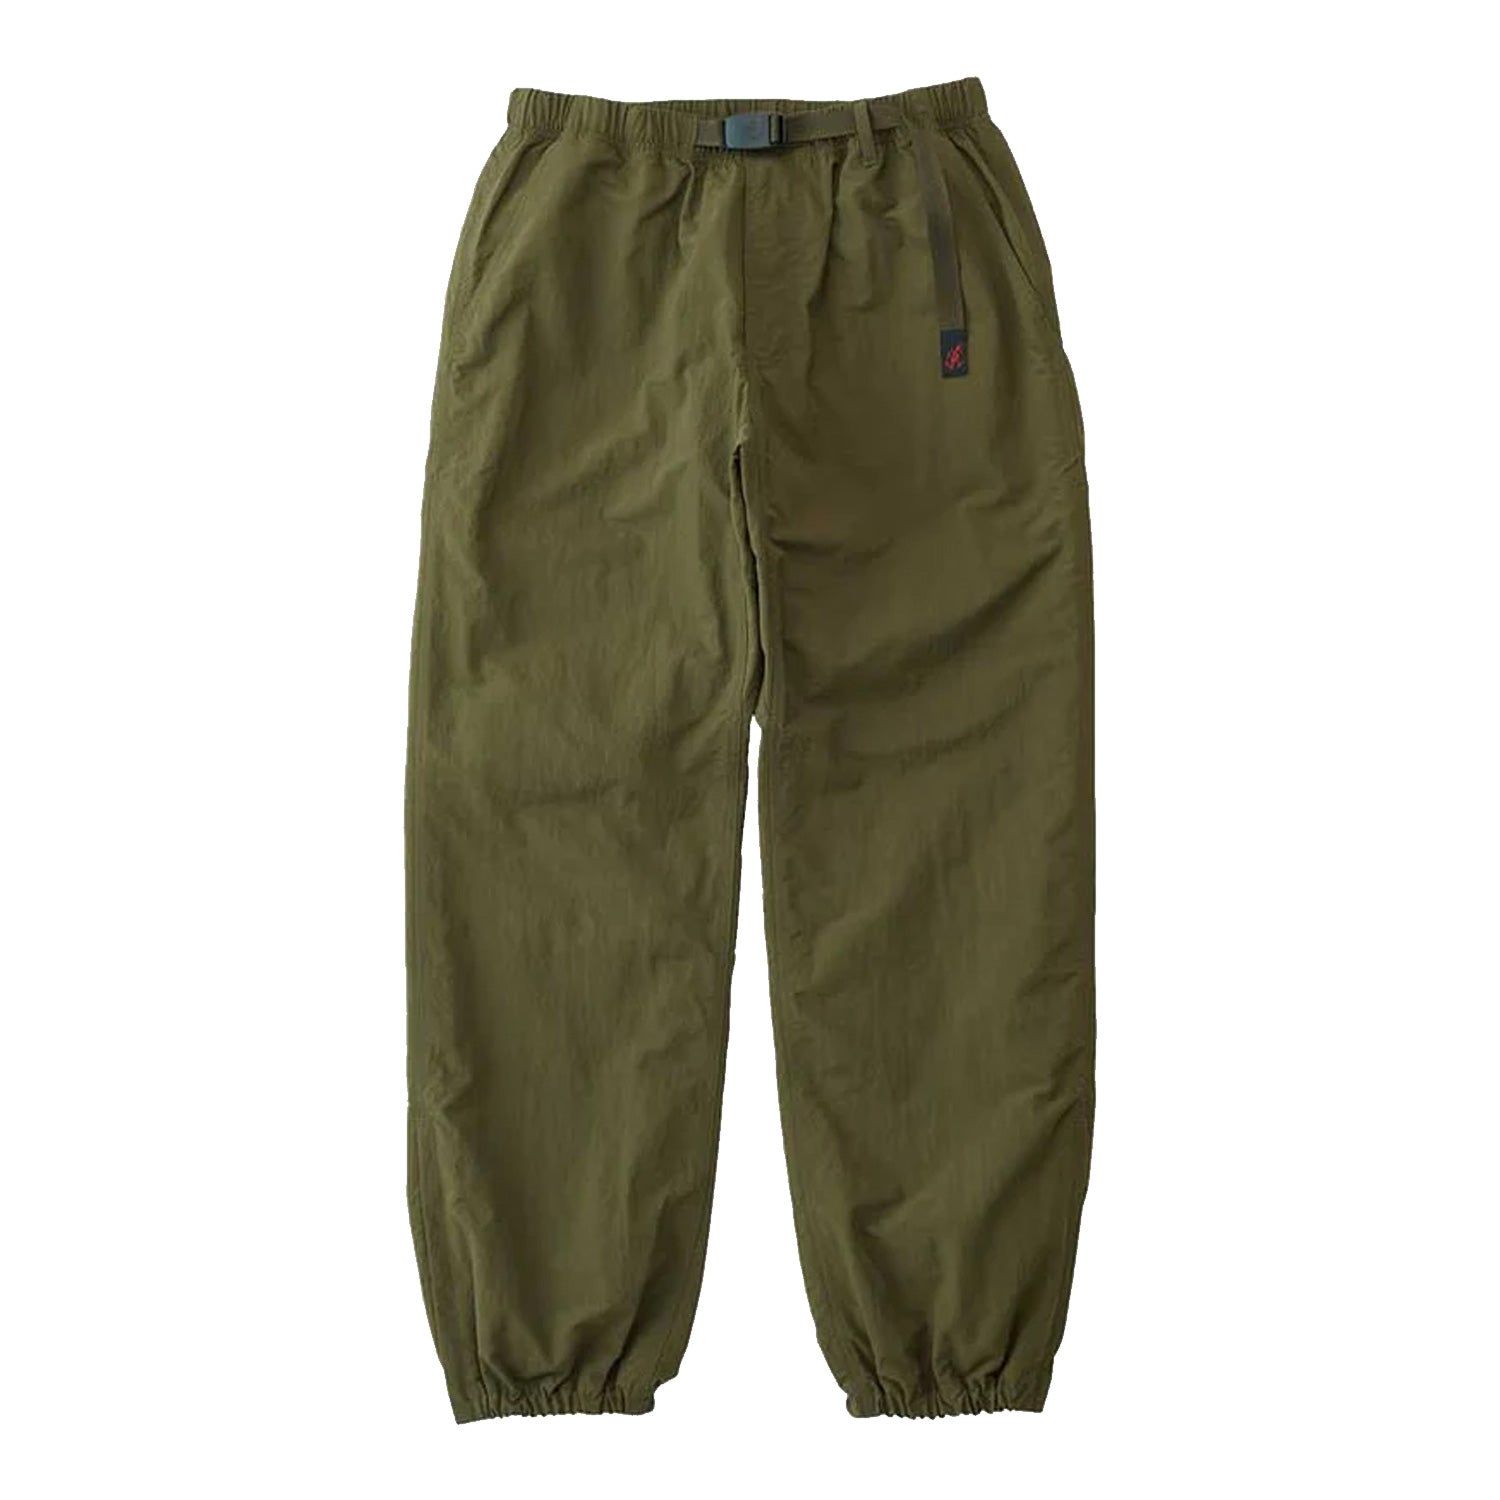 Olive green gramicci nylon outdoor track trousers with adjustable waist. Free uk shipping over £50